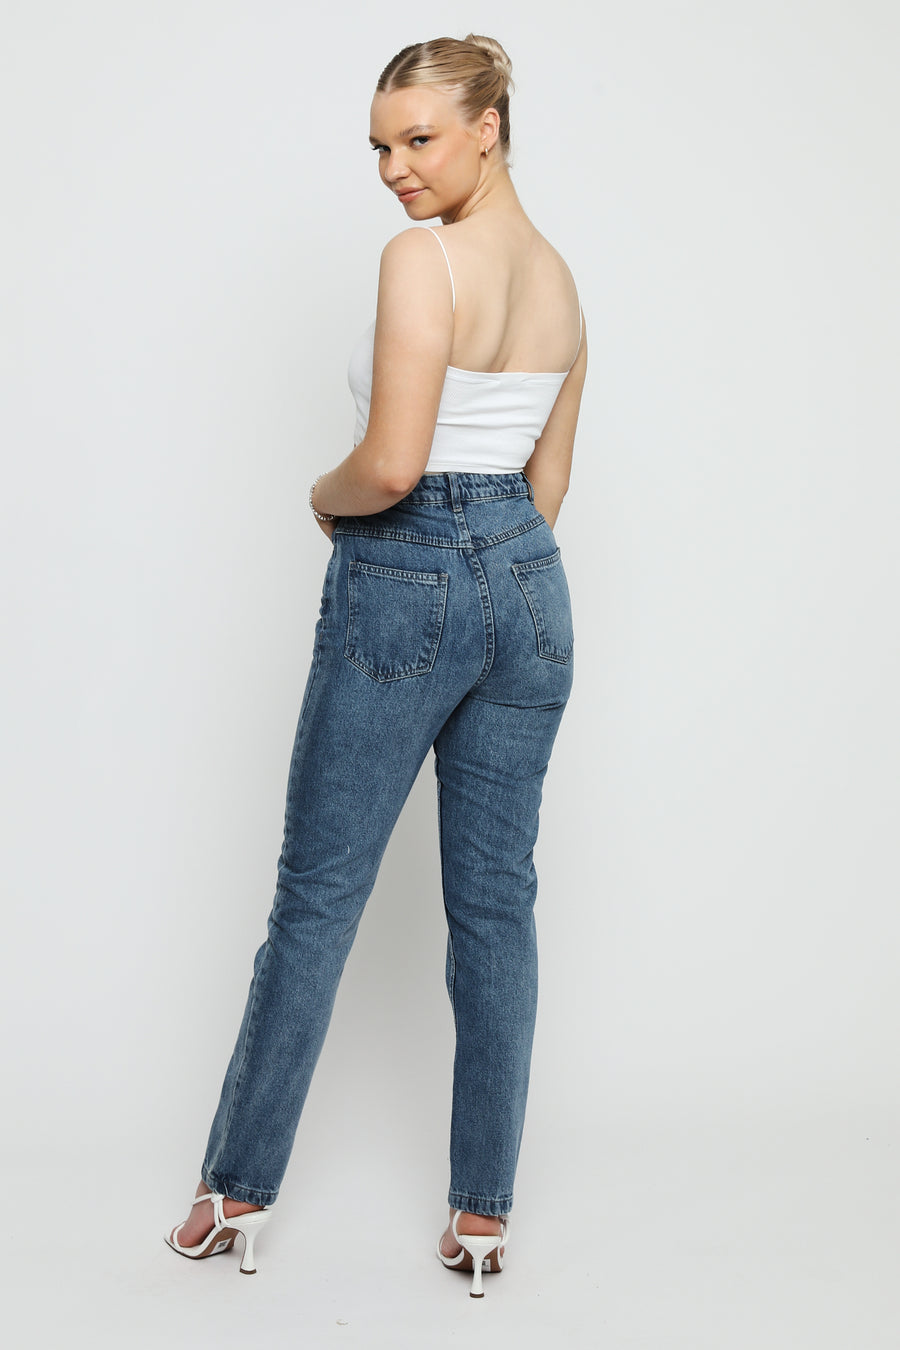 Mom style blue jeans